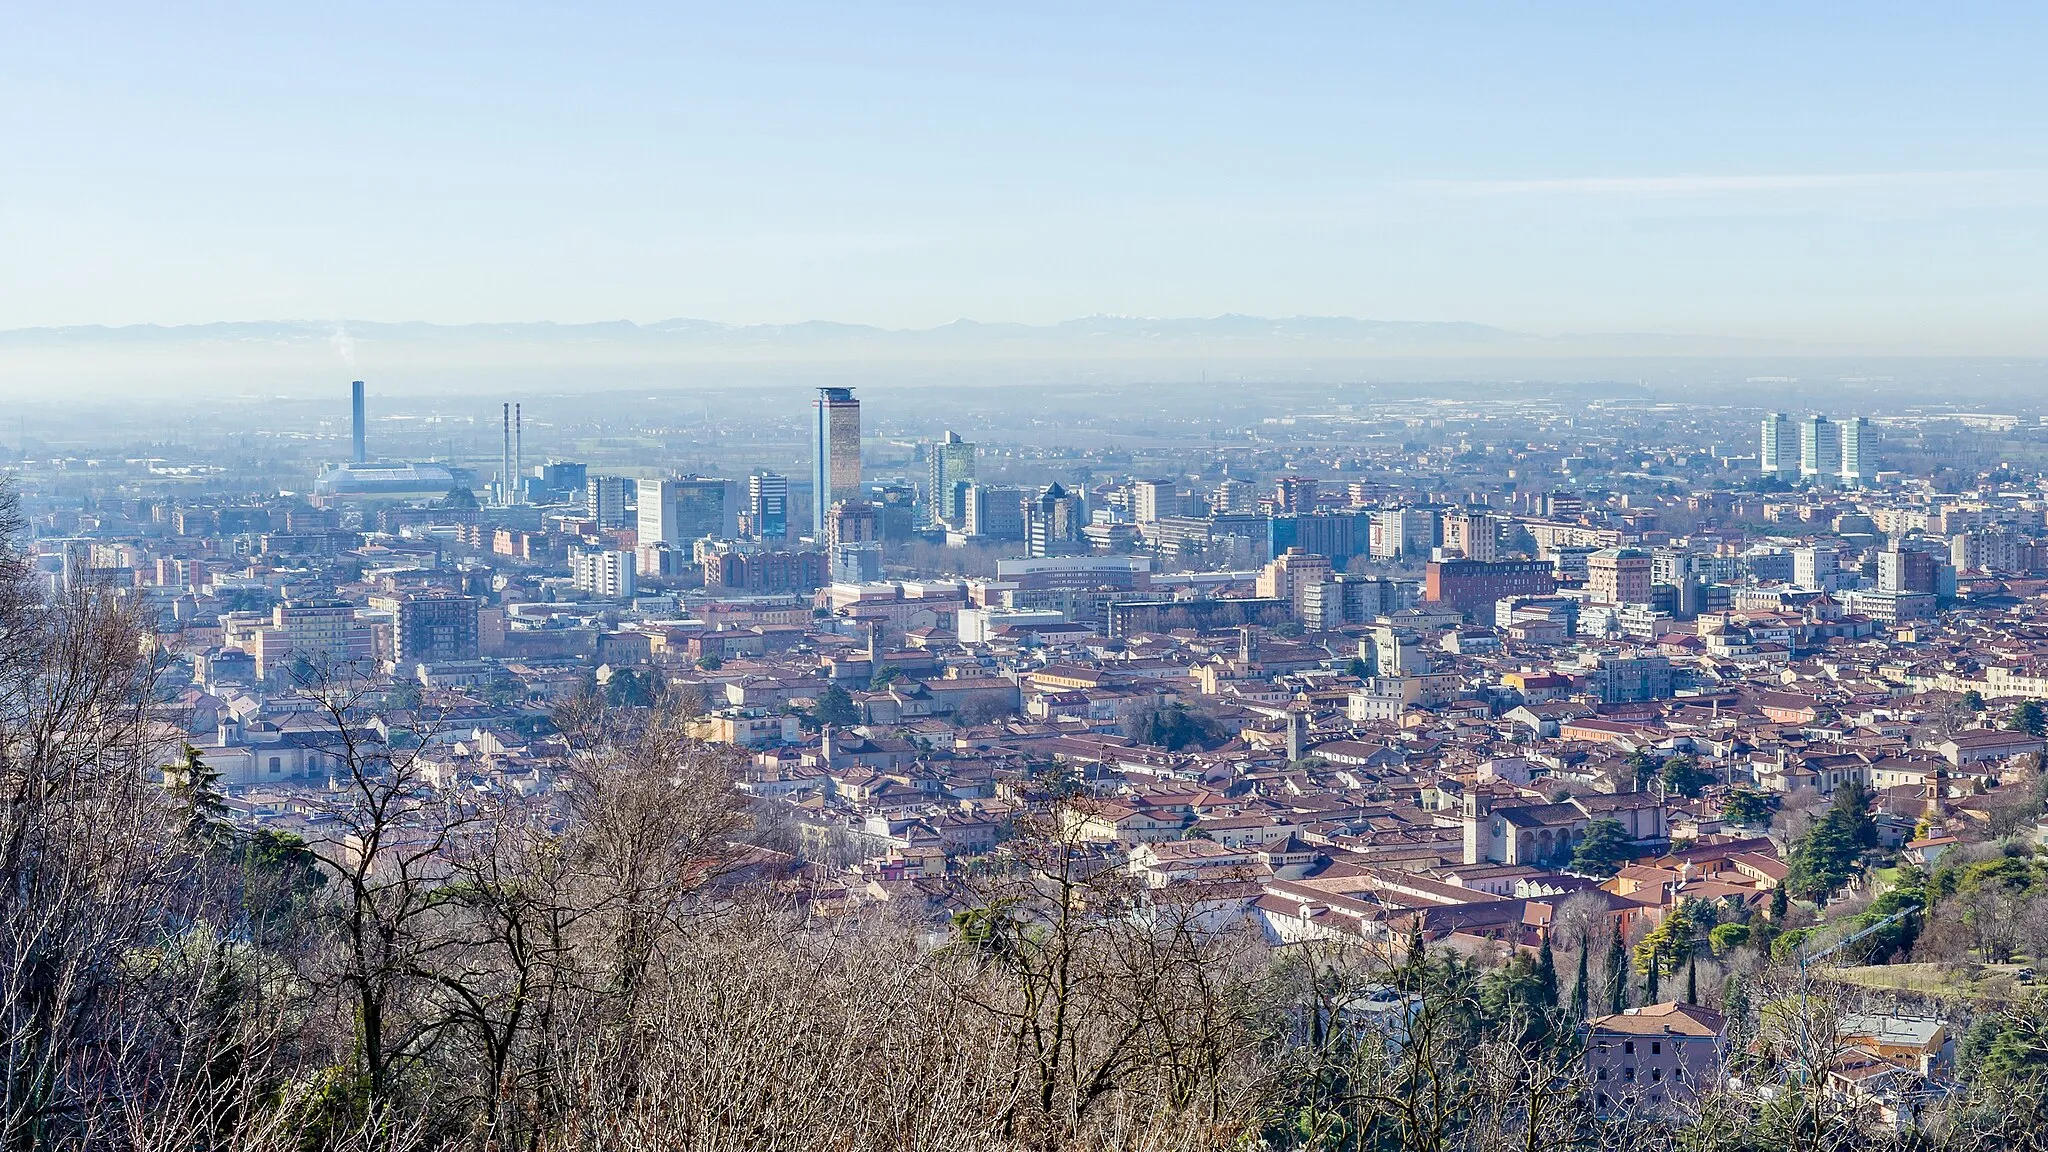 Photo showing: The skyline of the area of Brescia, Italy